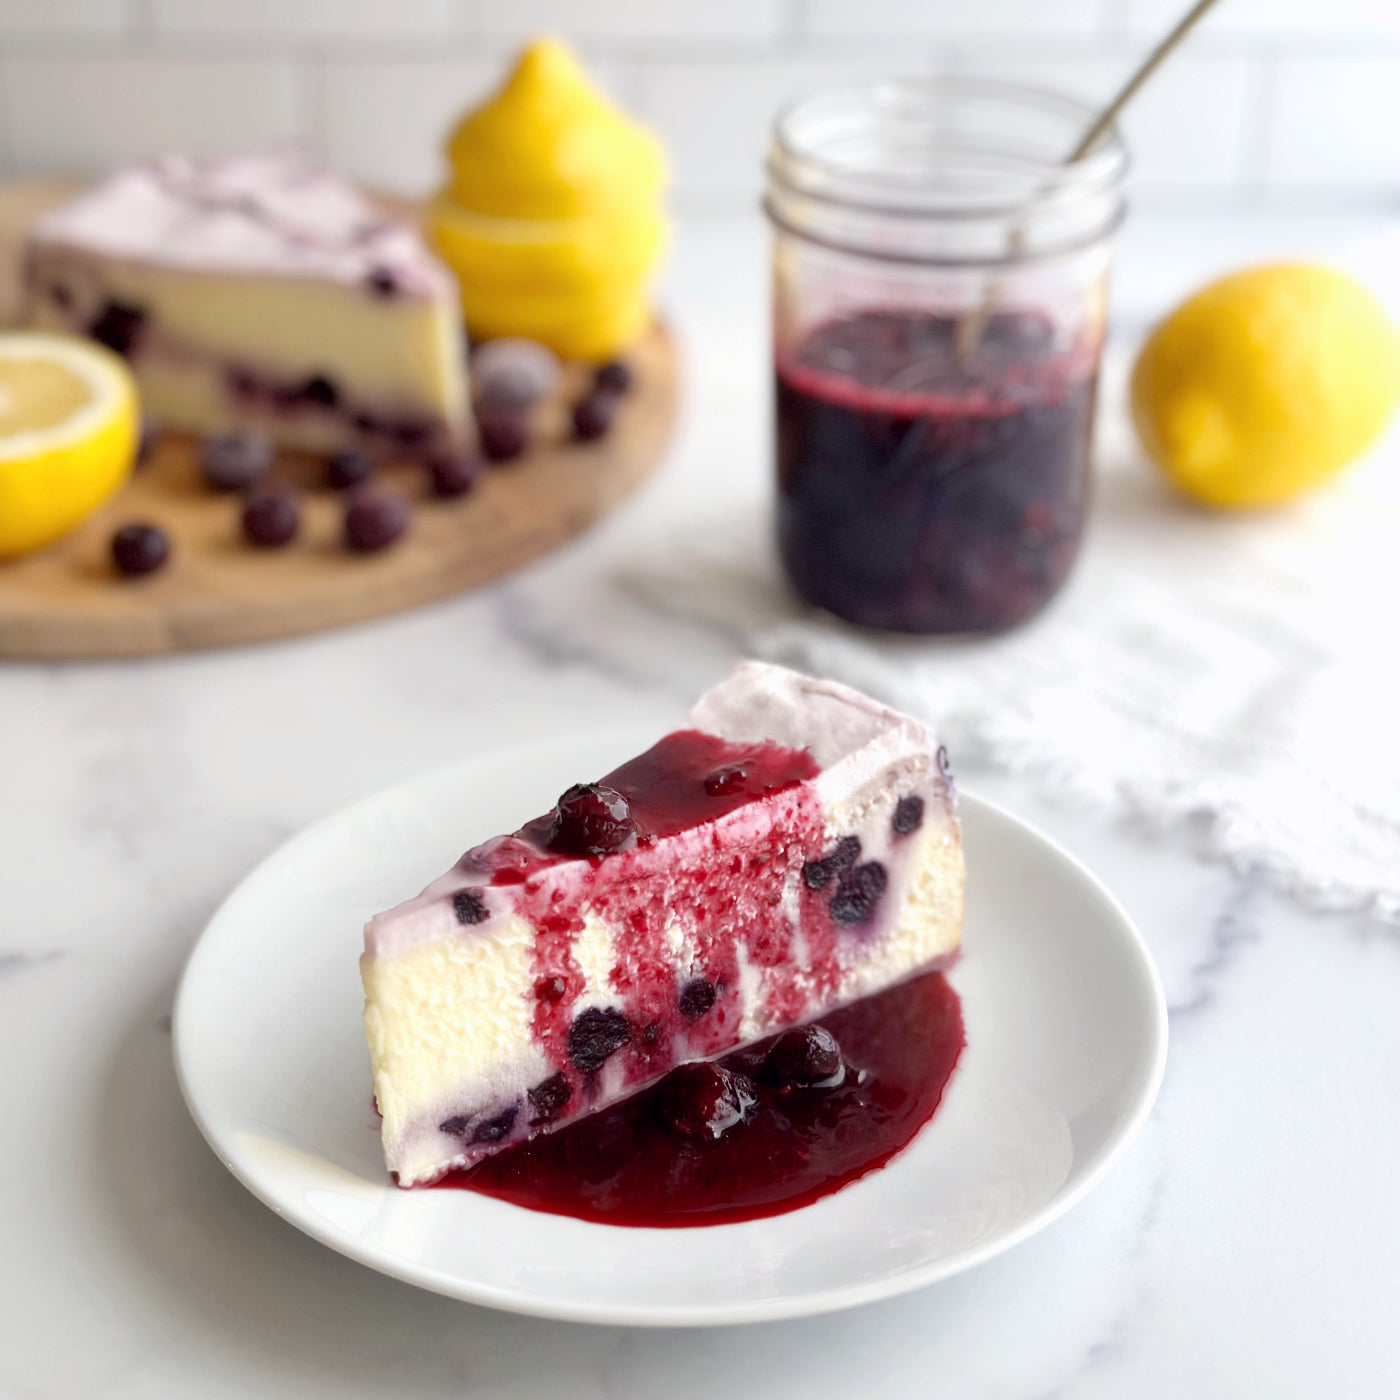 Velvety slice of Lemon Blueberry cheesecake with real blueberries baked-in, topped with a sweet blueberry cream cheese icing, and a homemade blueberry compote drizzled on top and dripping from the sides.